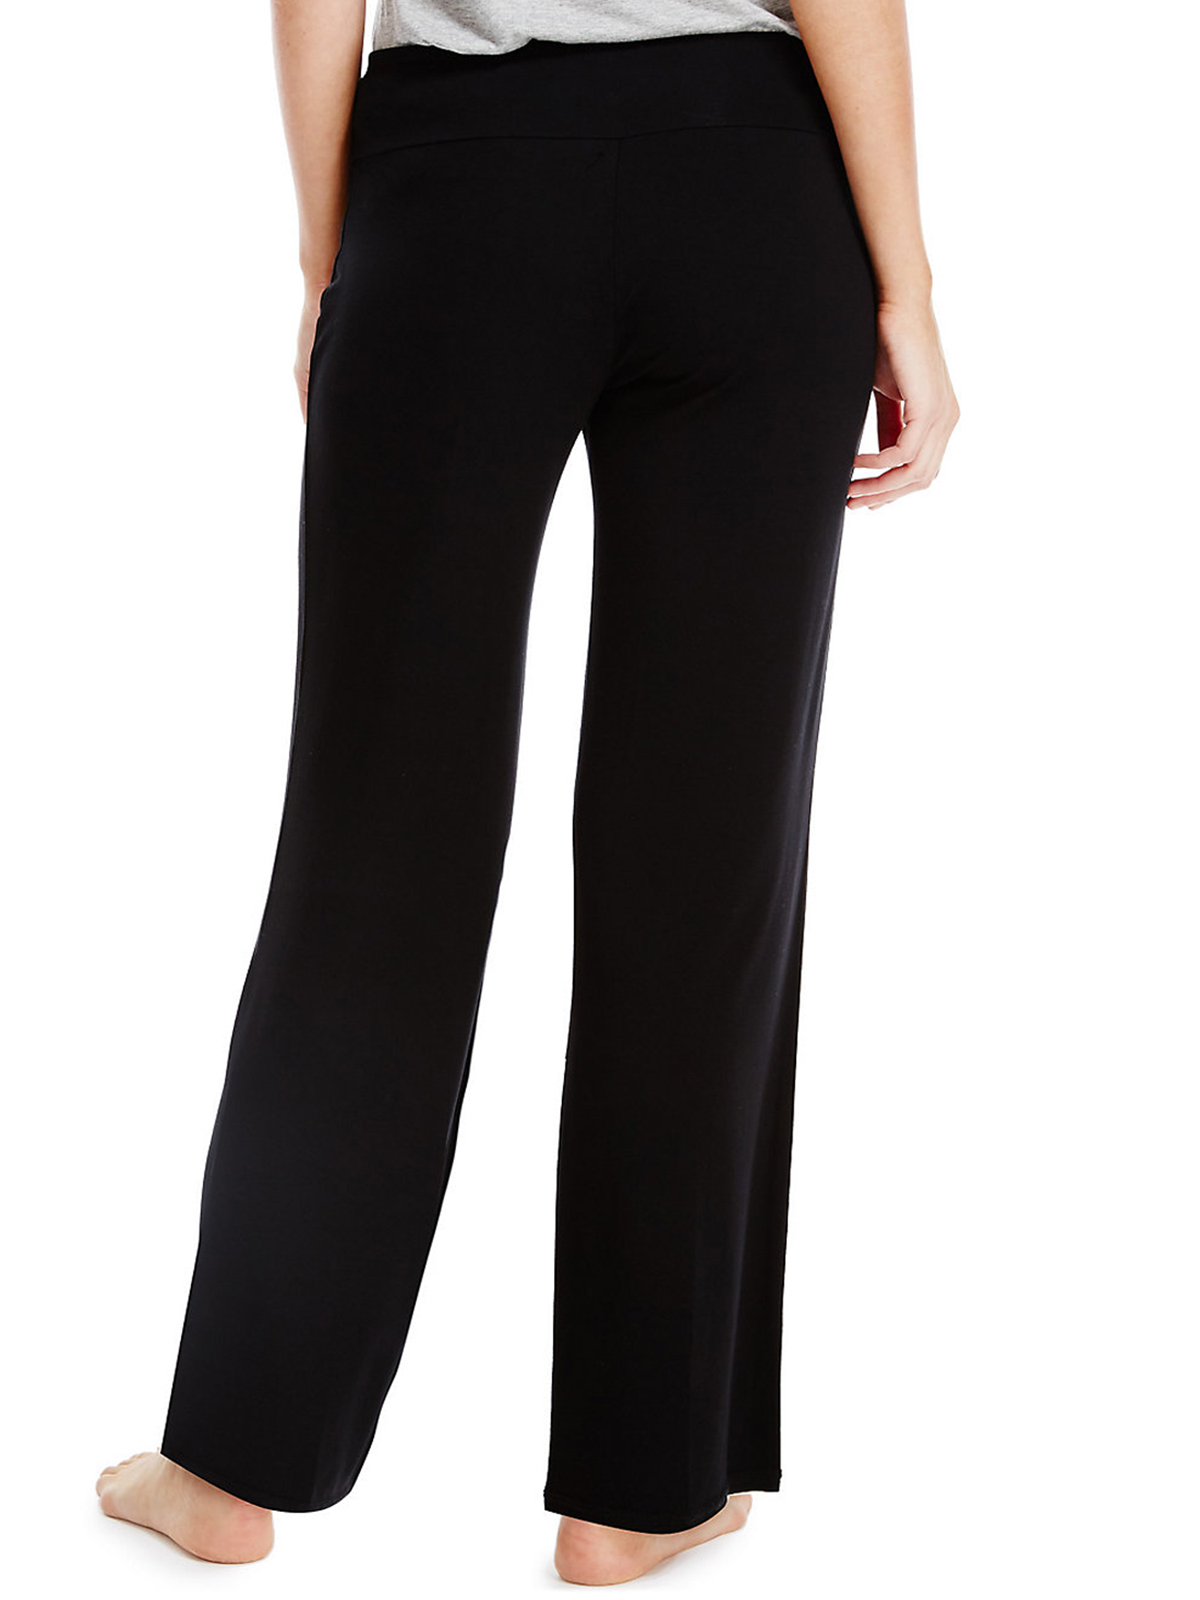 Marks and Spencer - - M&5 BLACK Wide Leg Dance Trousers - Size 8